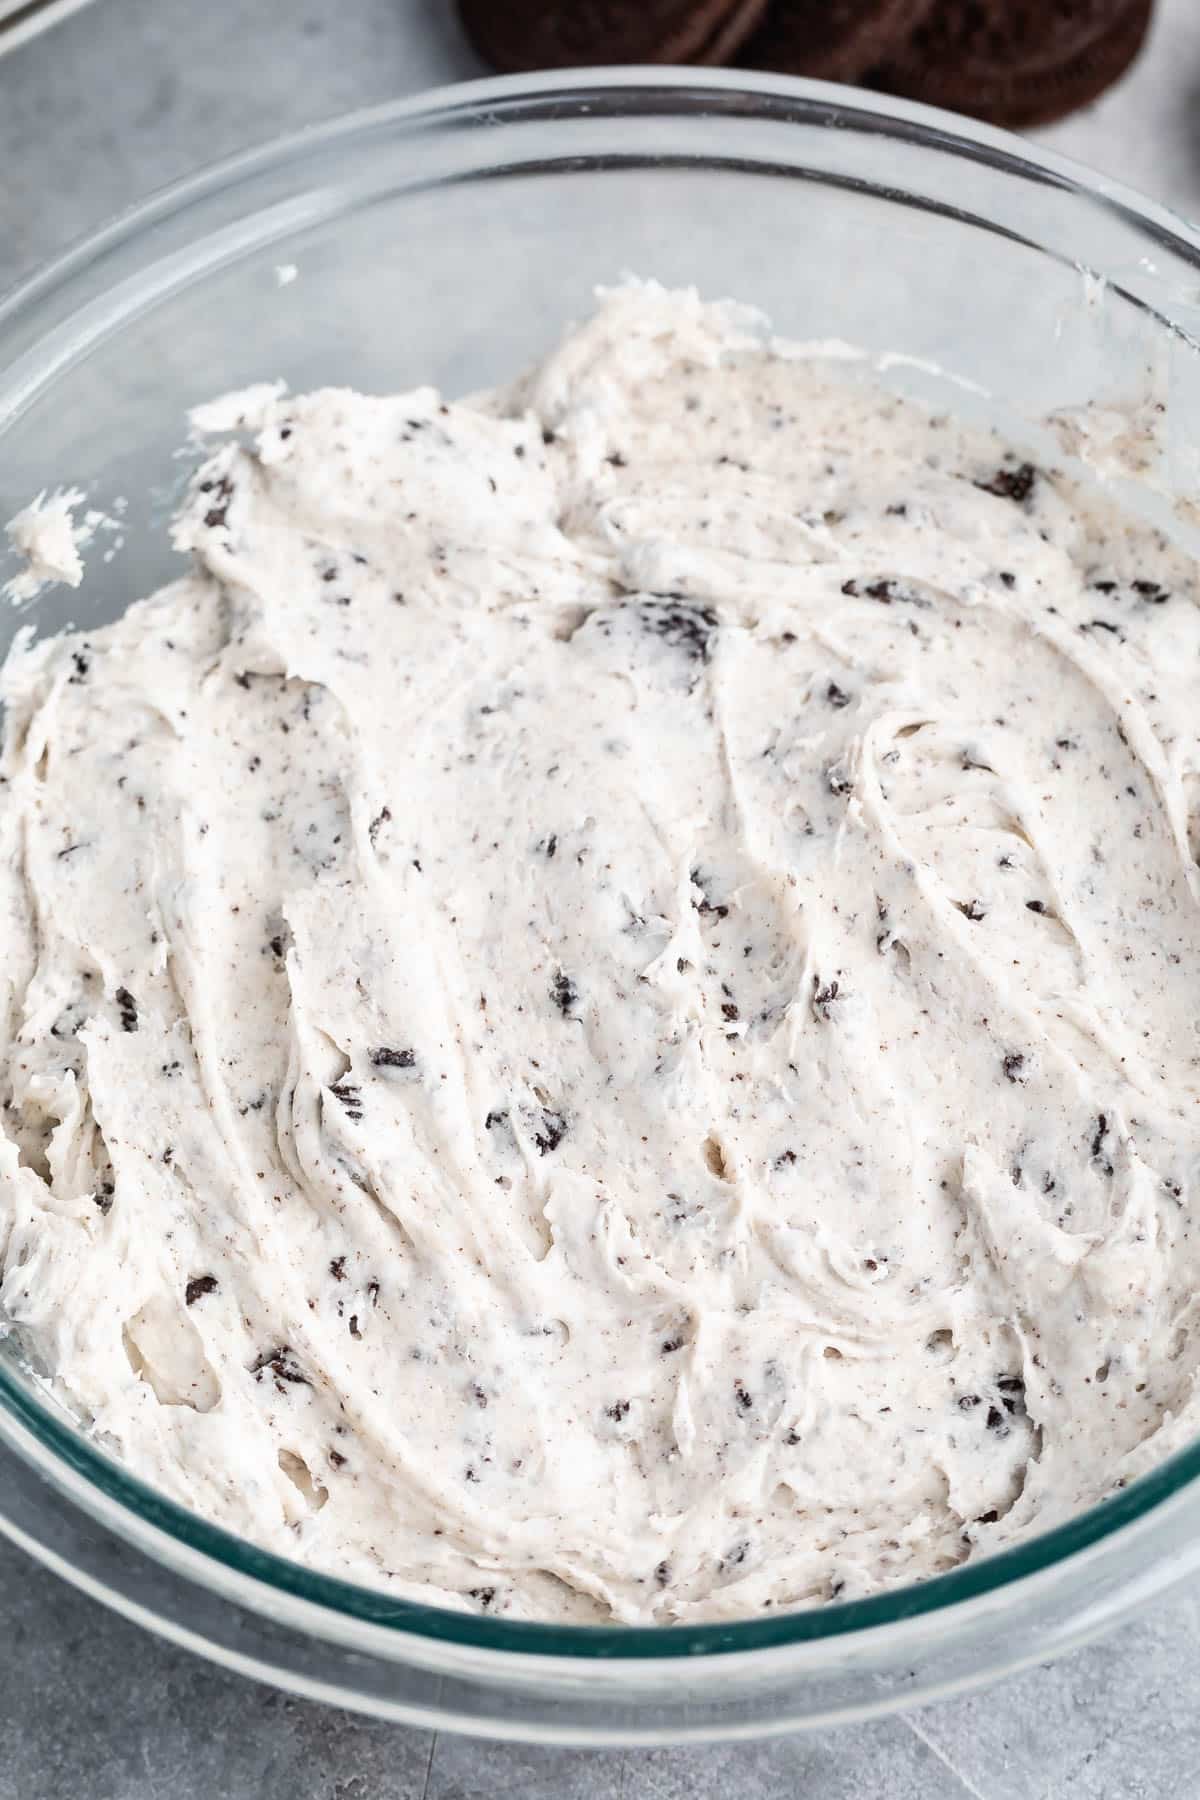 oreo frosting held in a clear bowl.